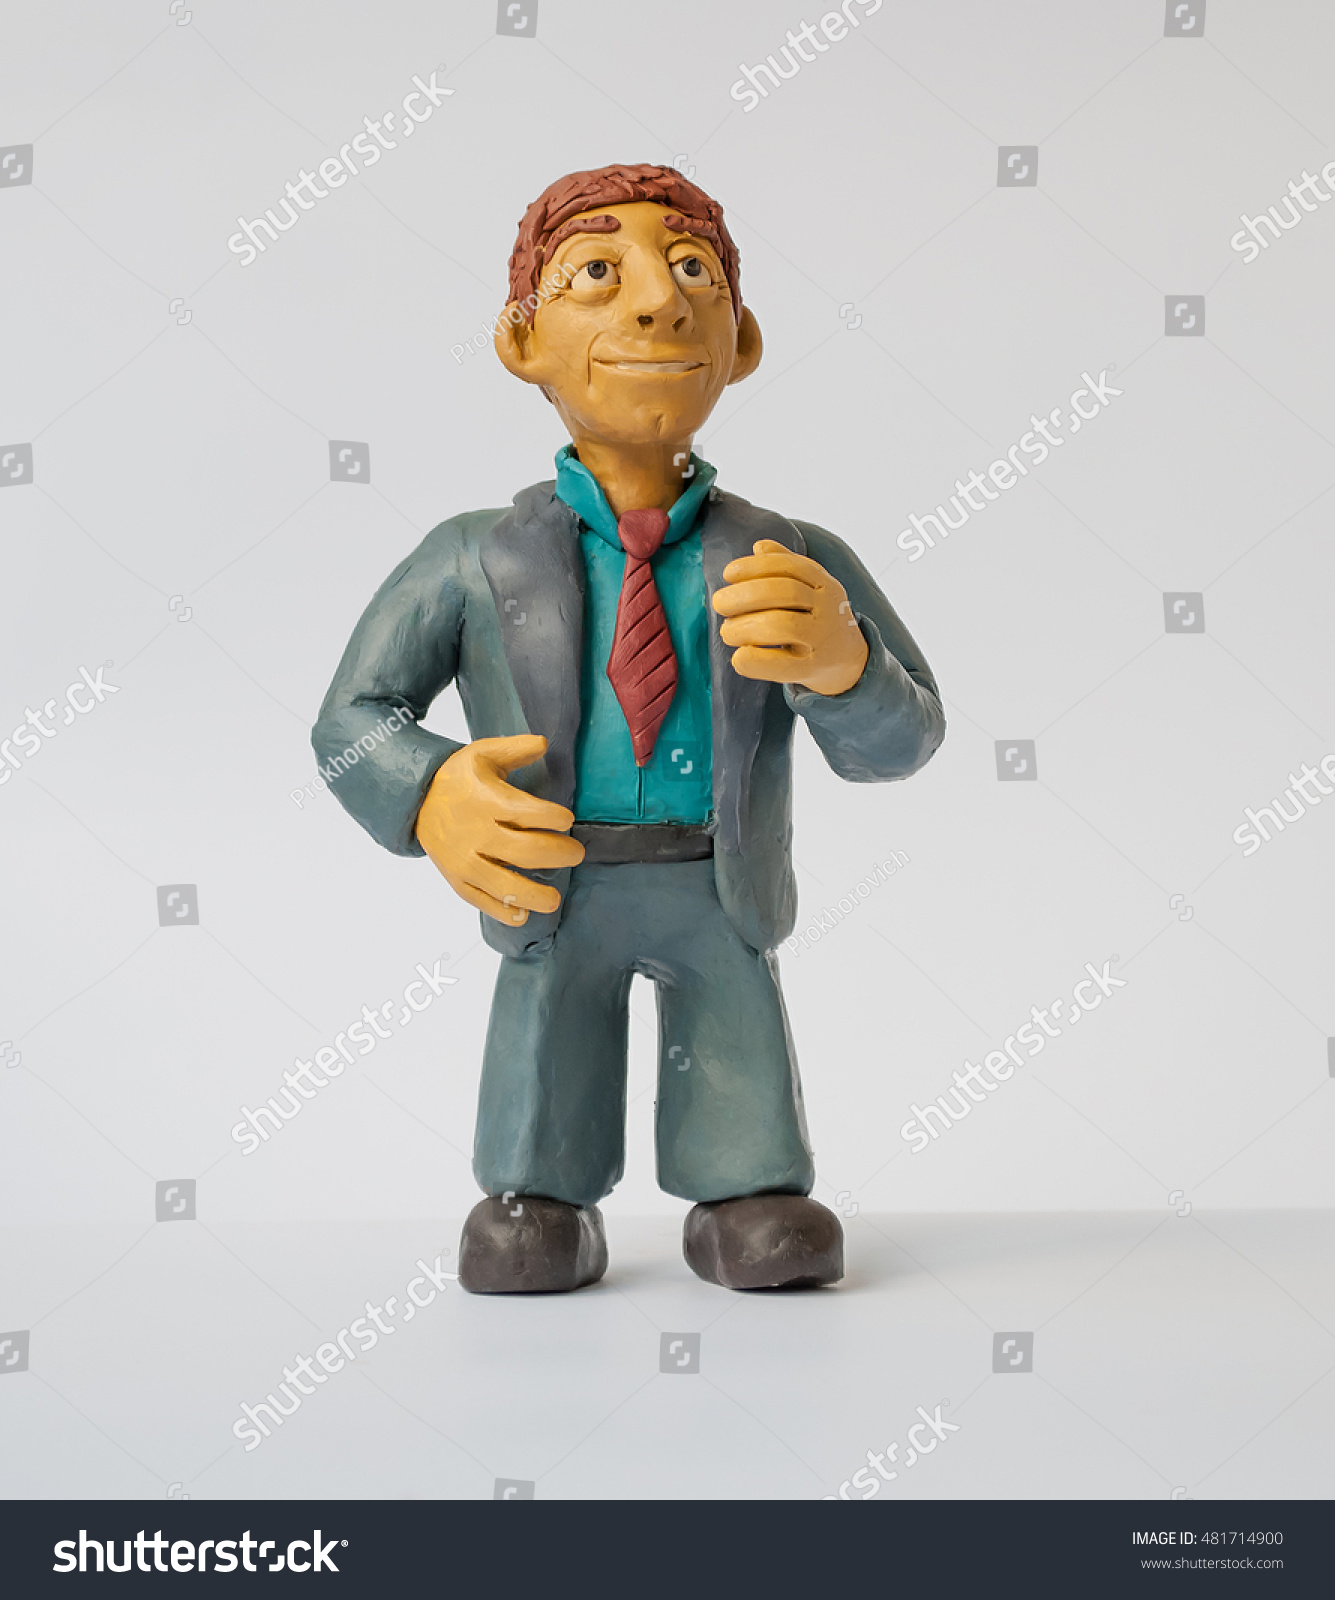 
Photos for your design . Made of plasticine funny man in a suit . Businessman cartoon style #481714900